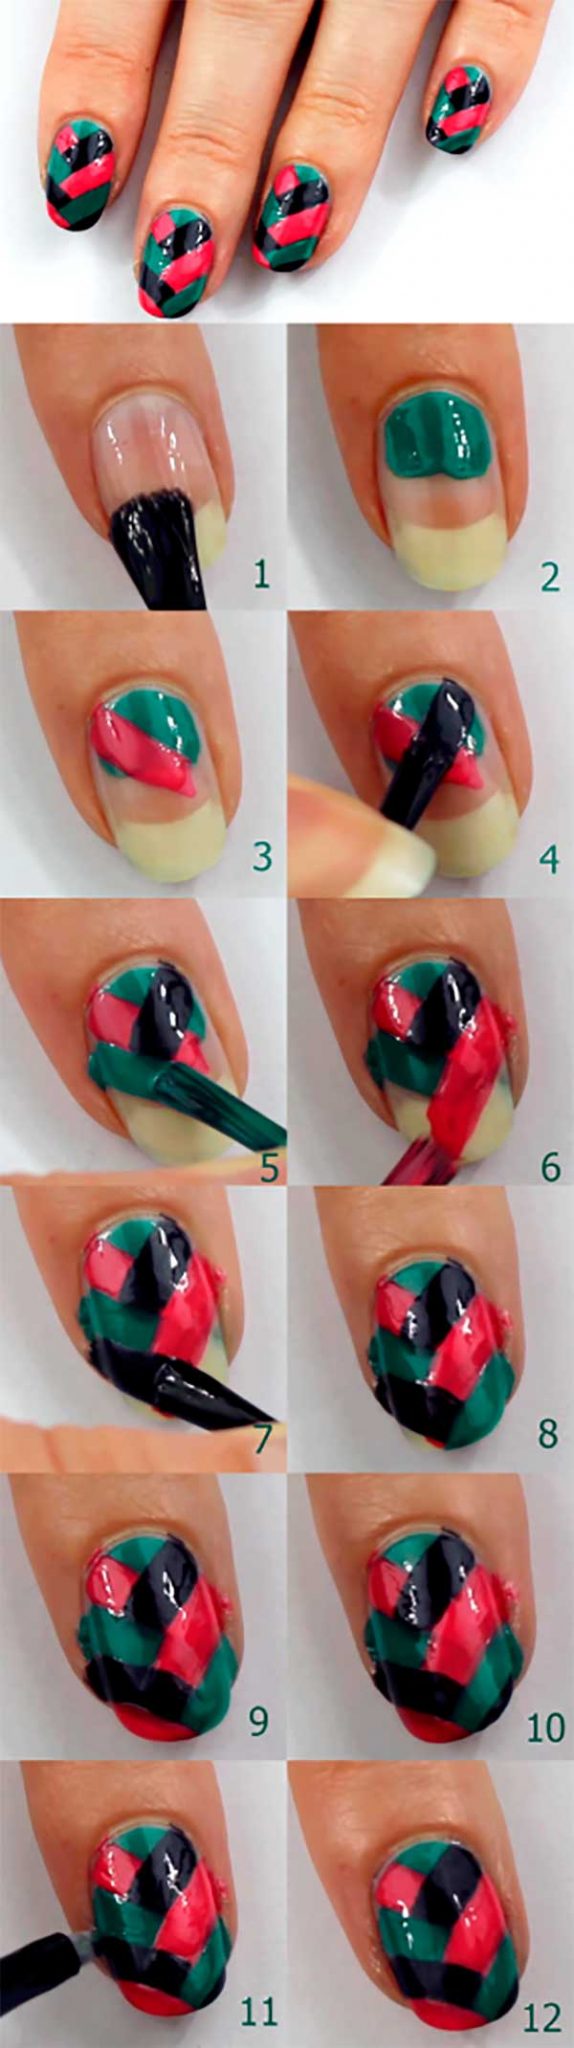 Green Red and Black Twisted Easy Nail Art Design Tutorial in 12 Steps for Beginners